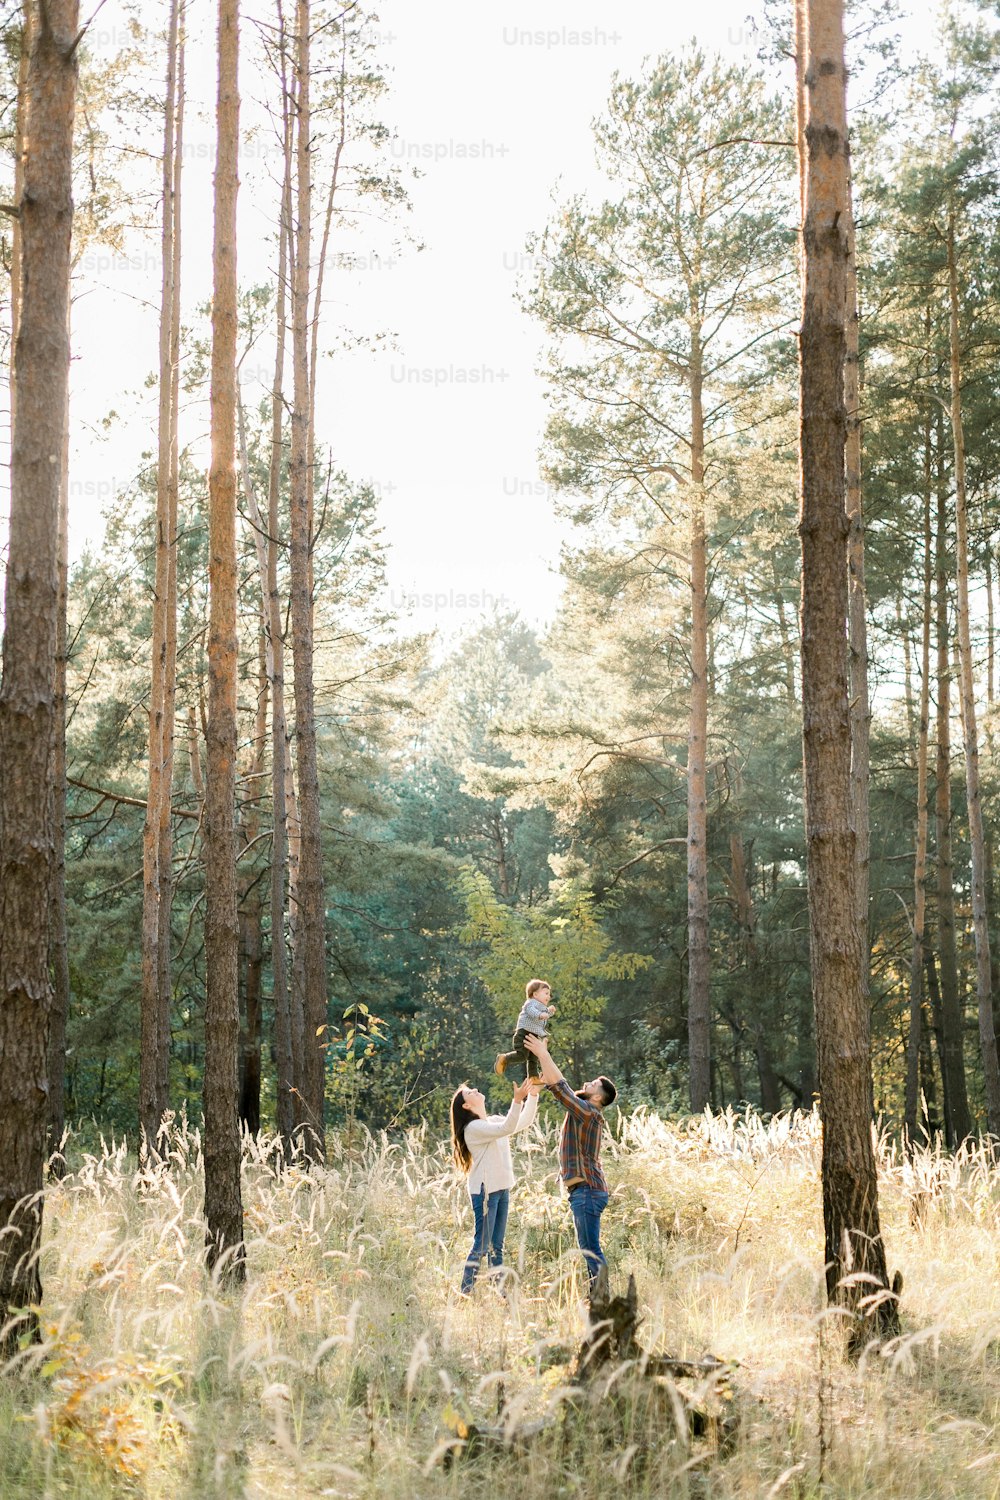 Outdoor portrait of happy young parents, having fun and lifting up their little cute baby son, during walk in autumn forest at sunny day.